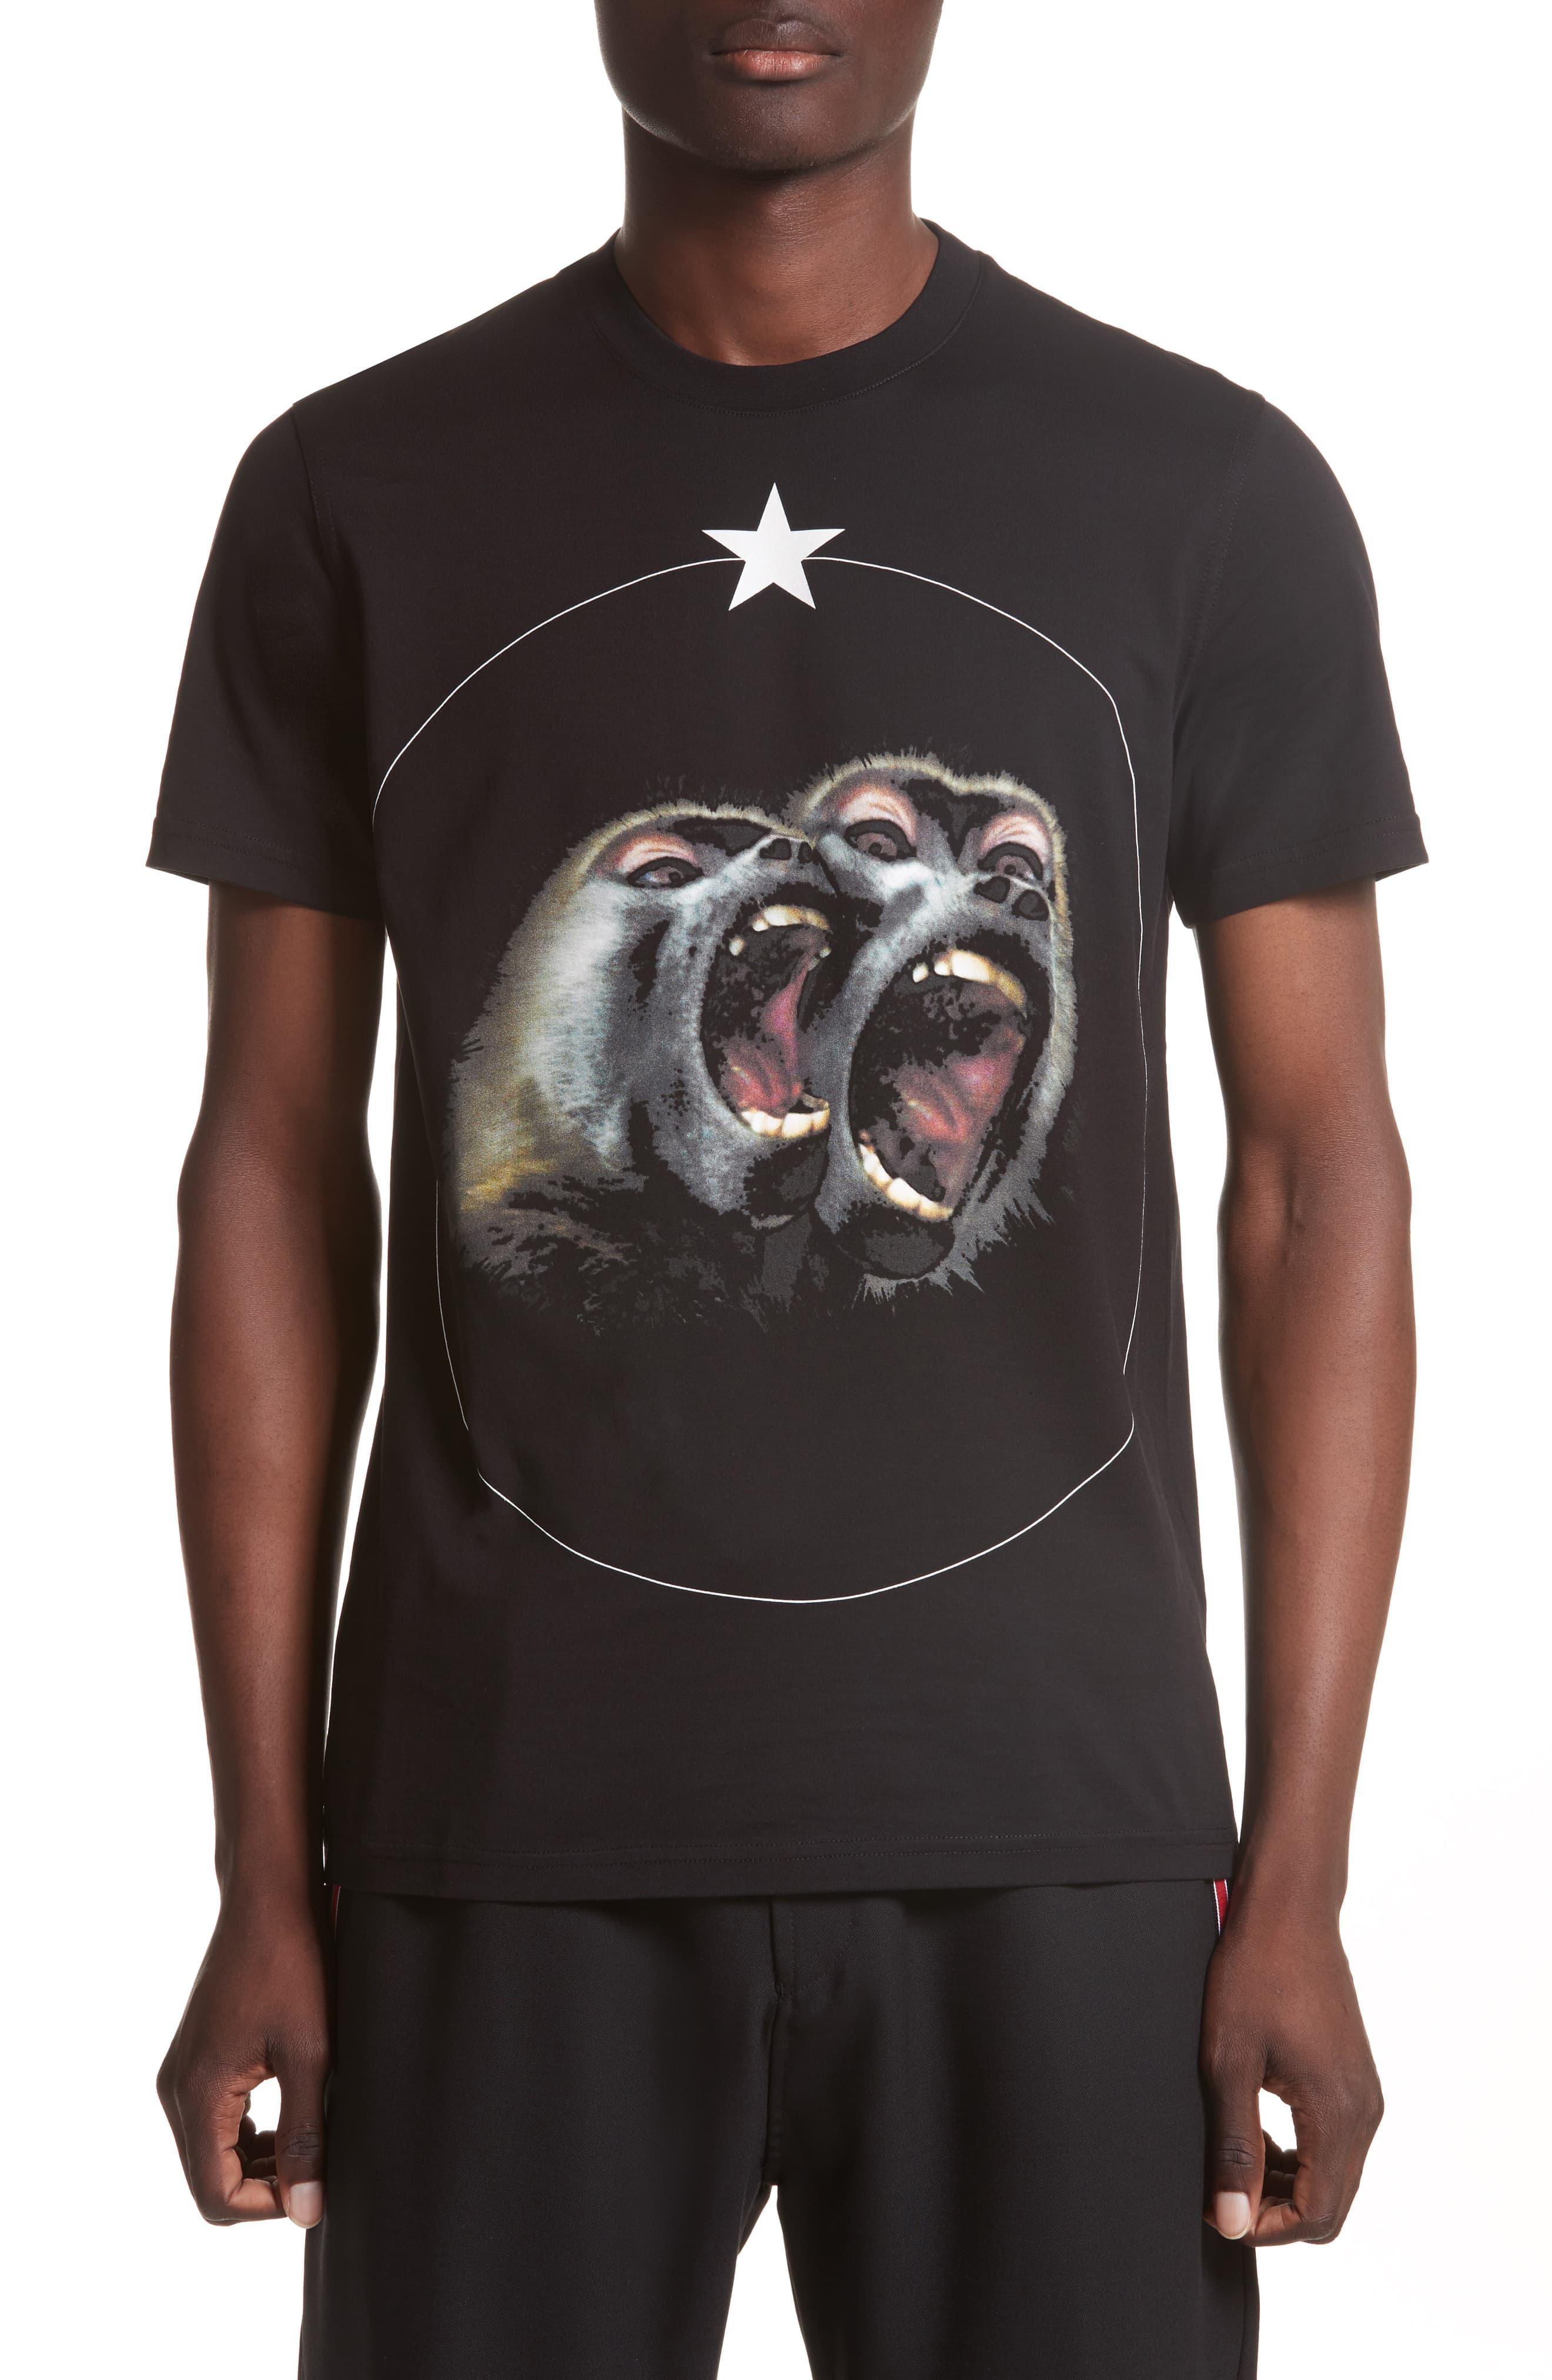 Givenchy Cuban Fit Monkey Brothers Graphic T-shirt in Black for Men - Lyst